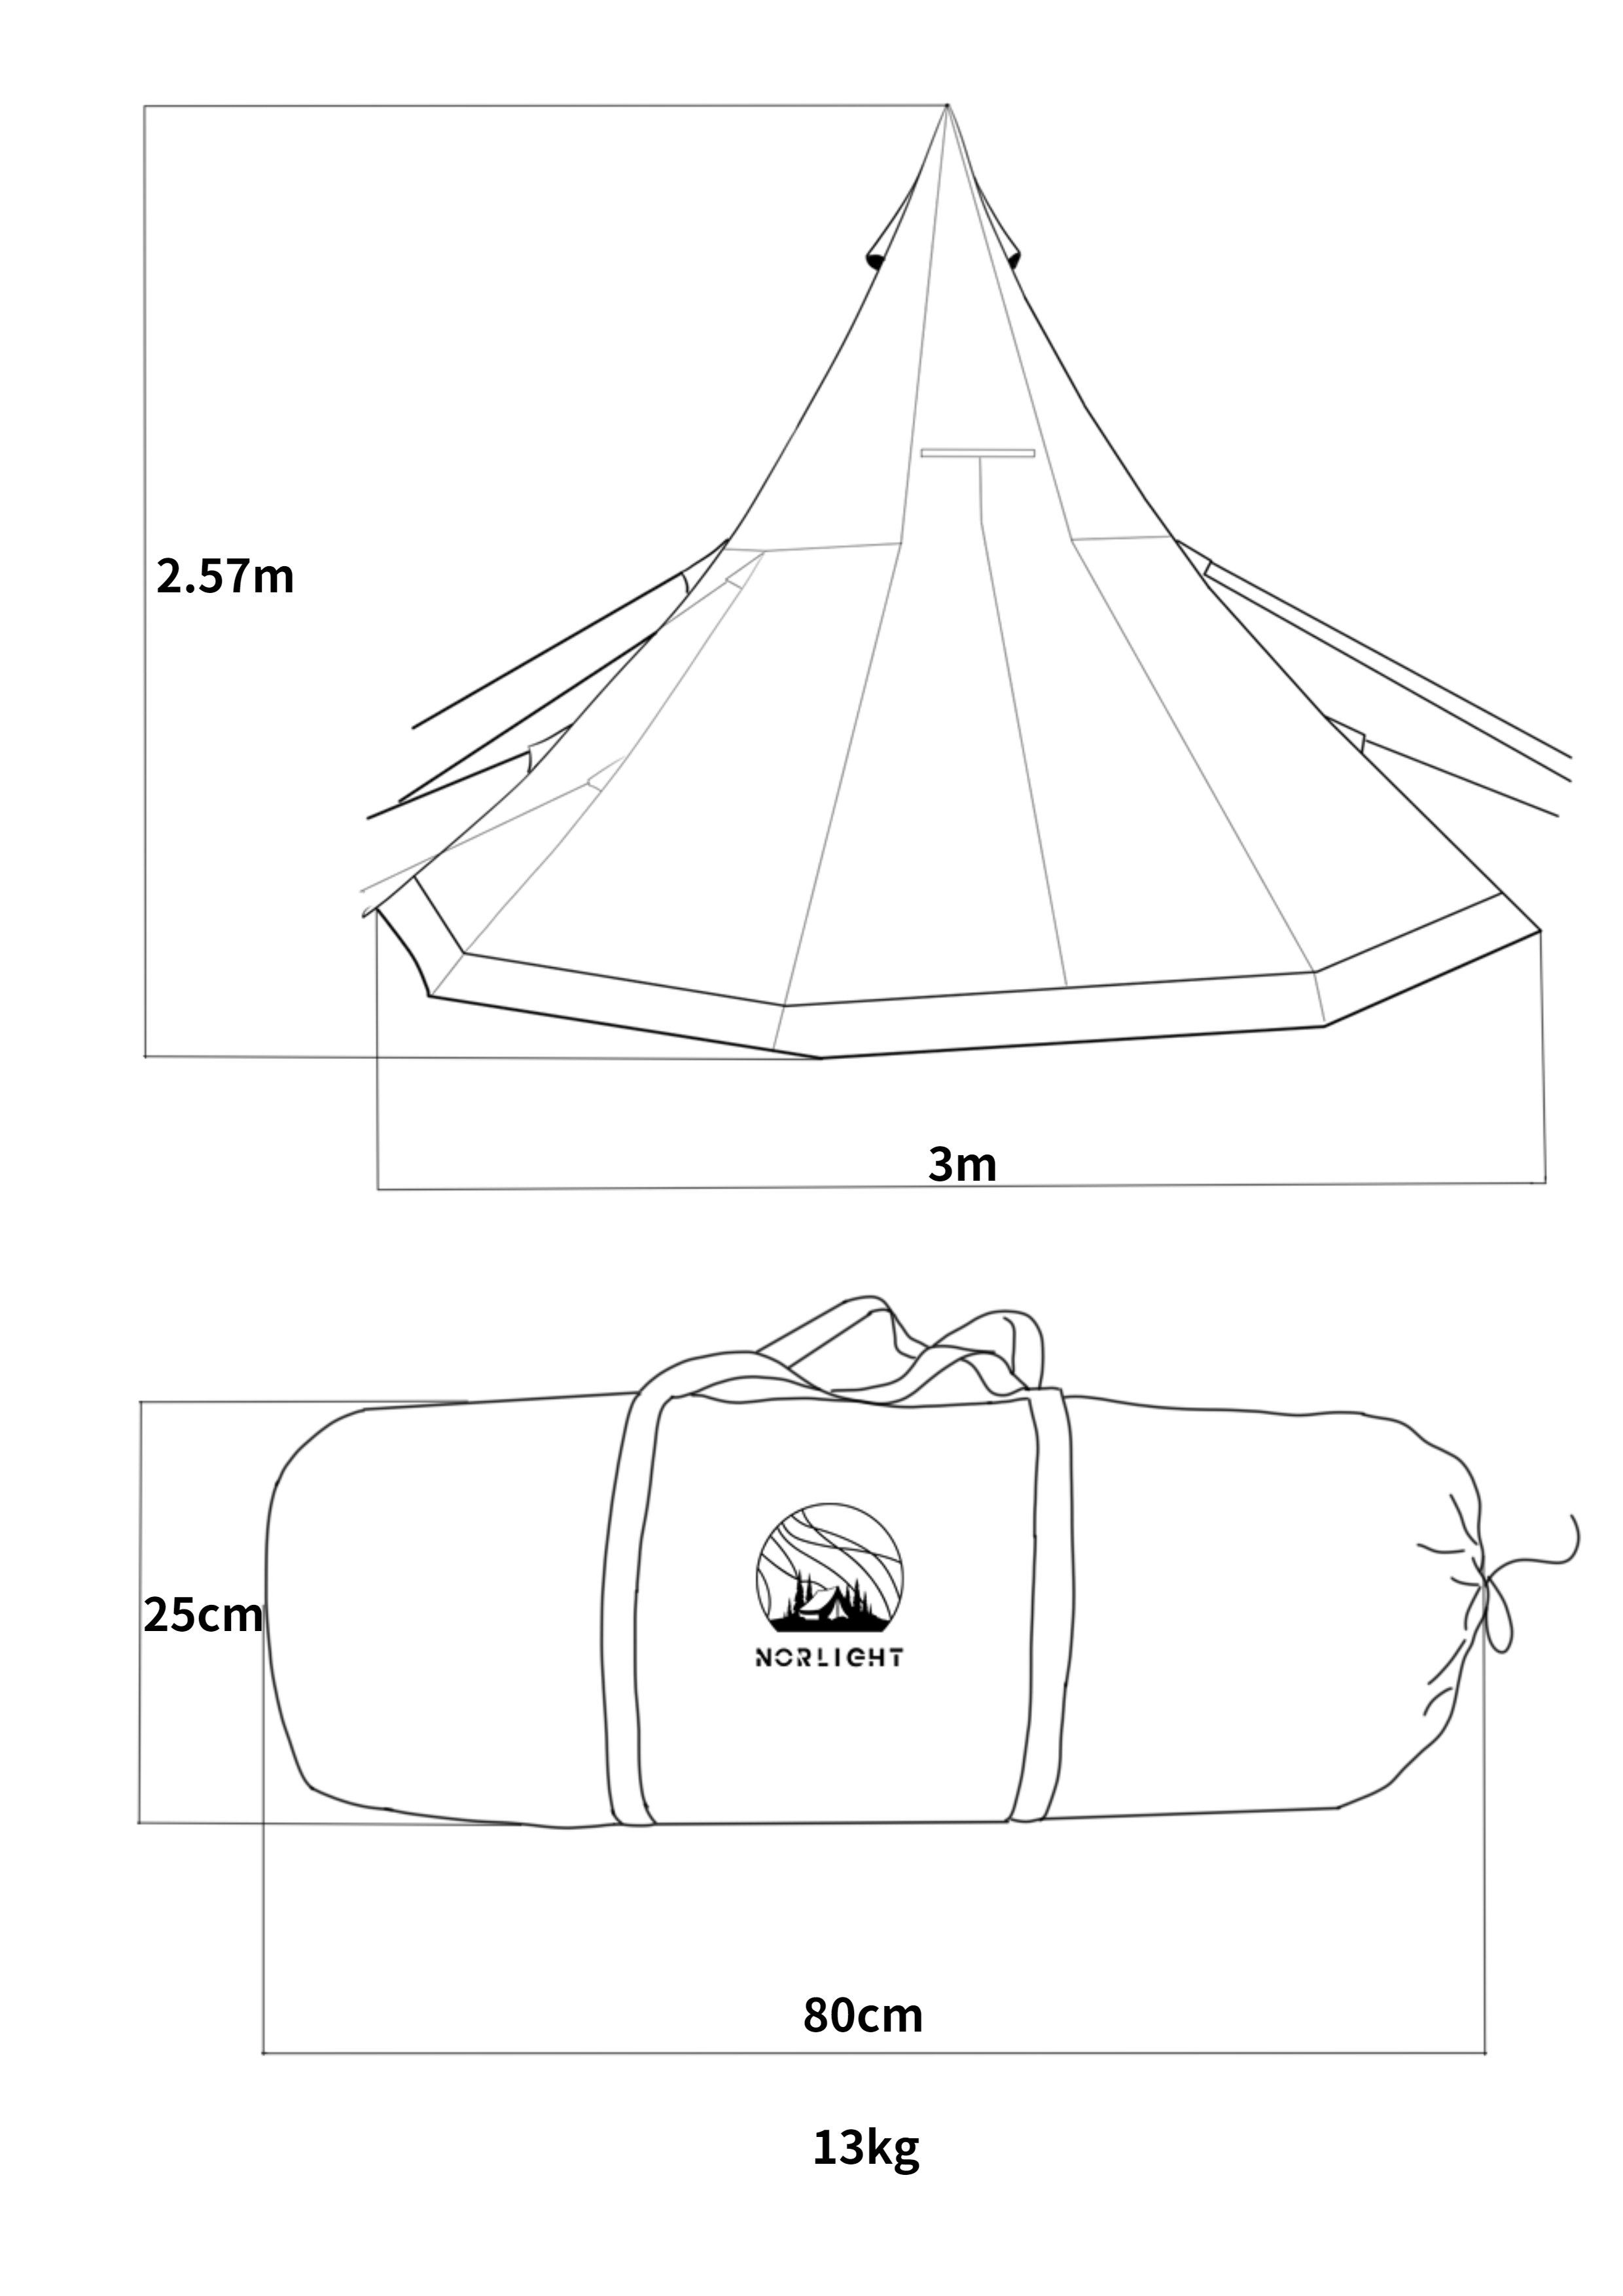 Canvas Camo Tepee Tent - 3 Mtr - 2 Person - Tepee Tent - Tipi Tent